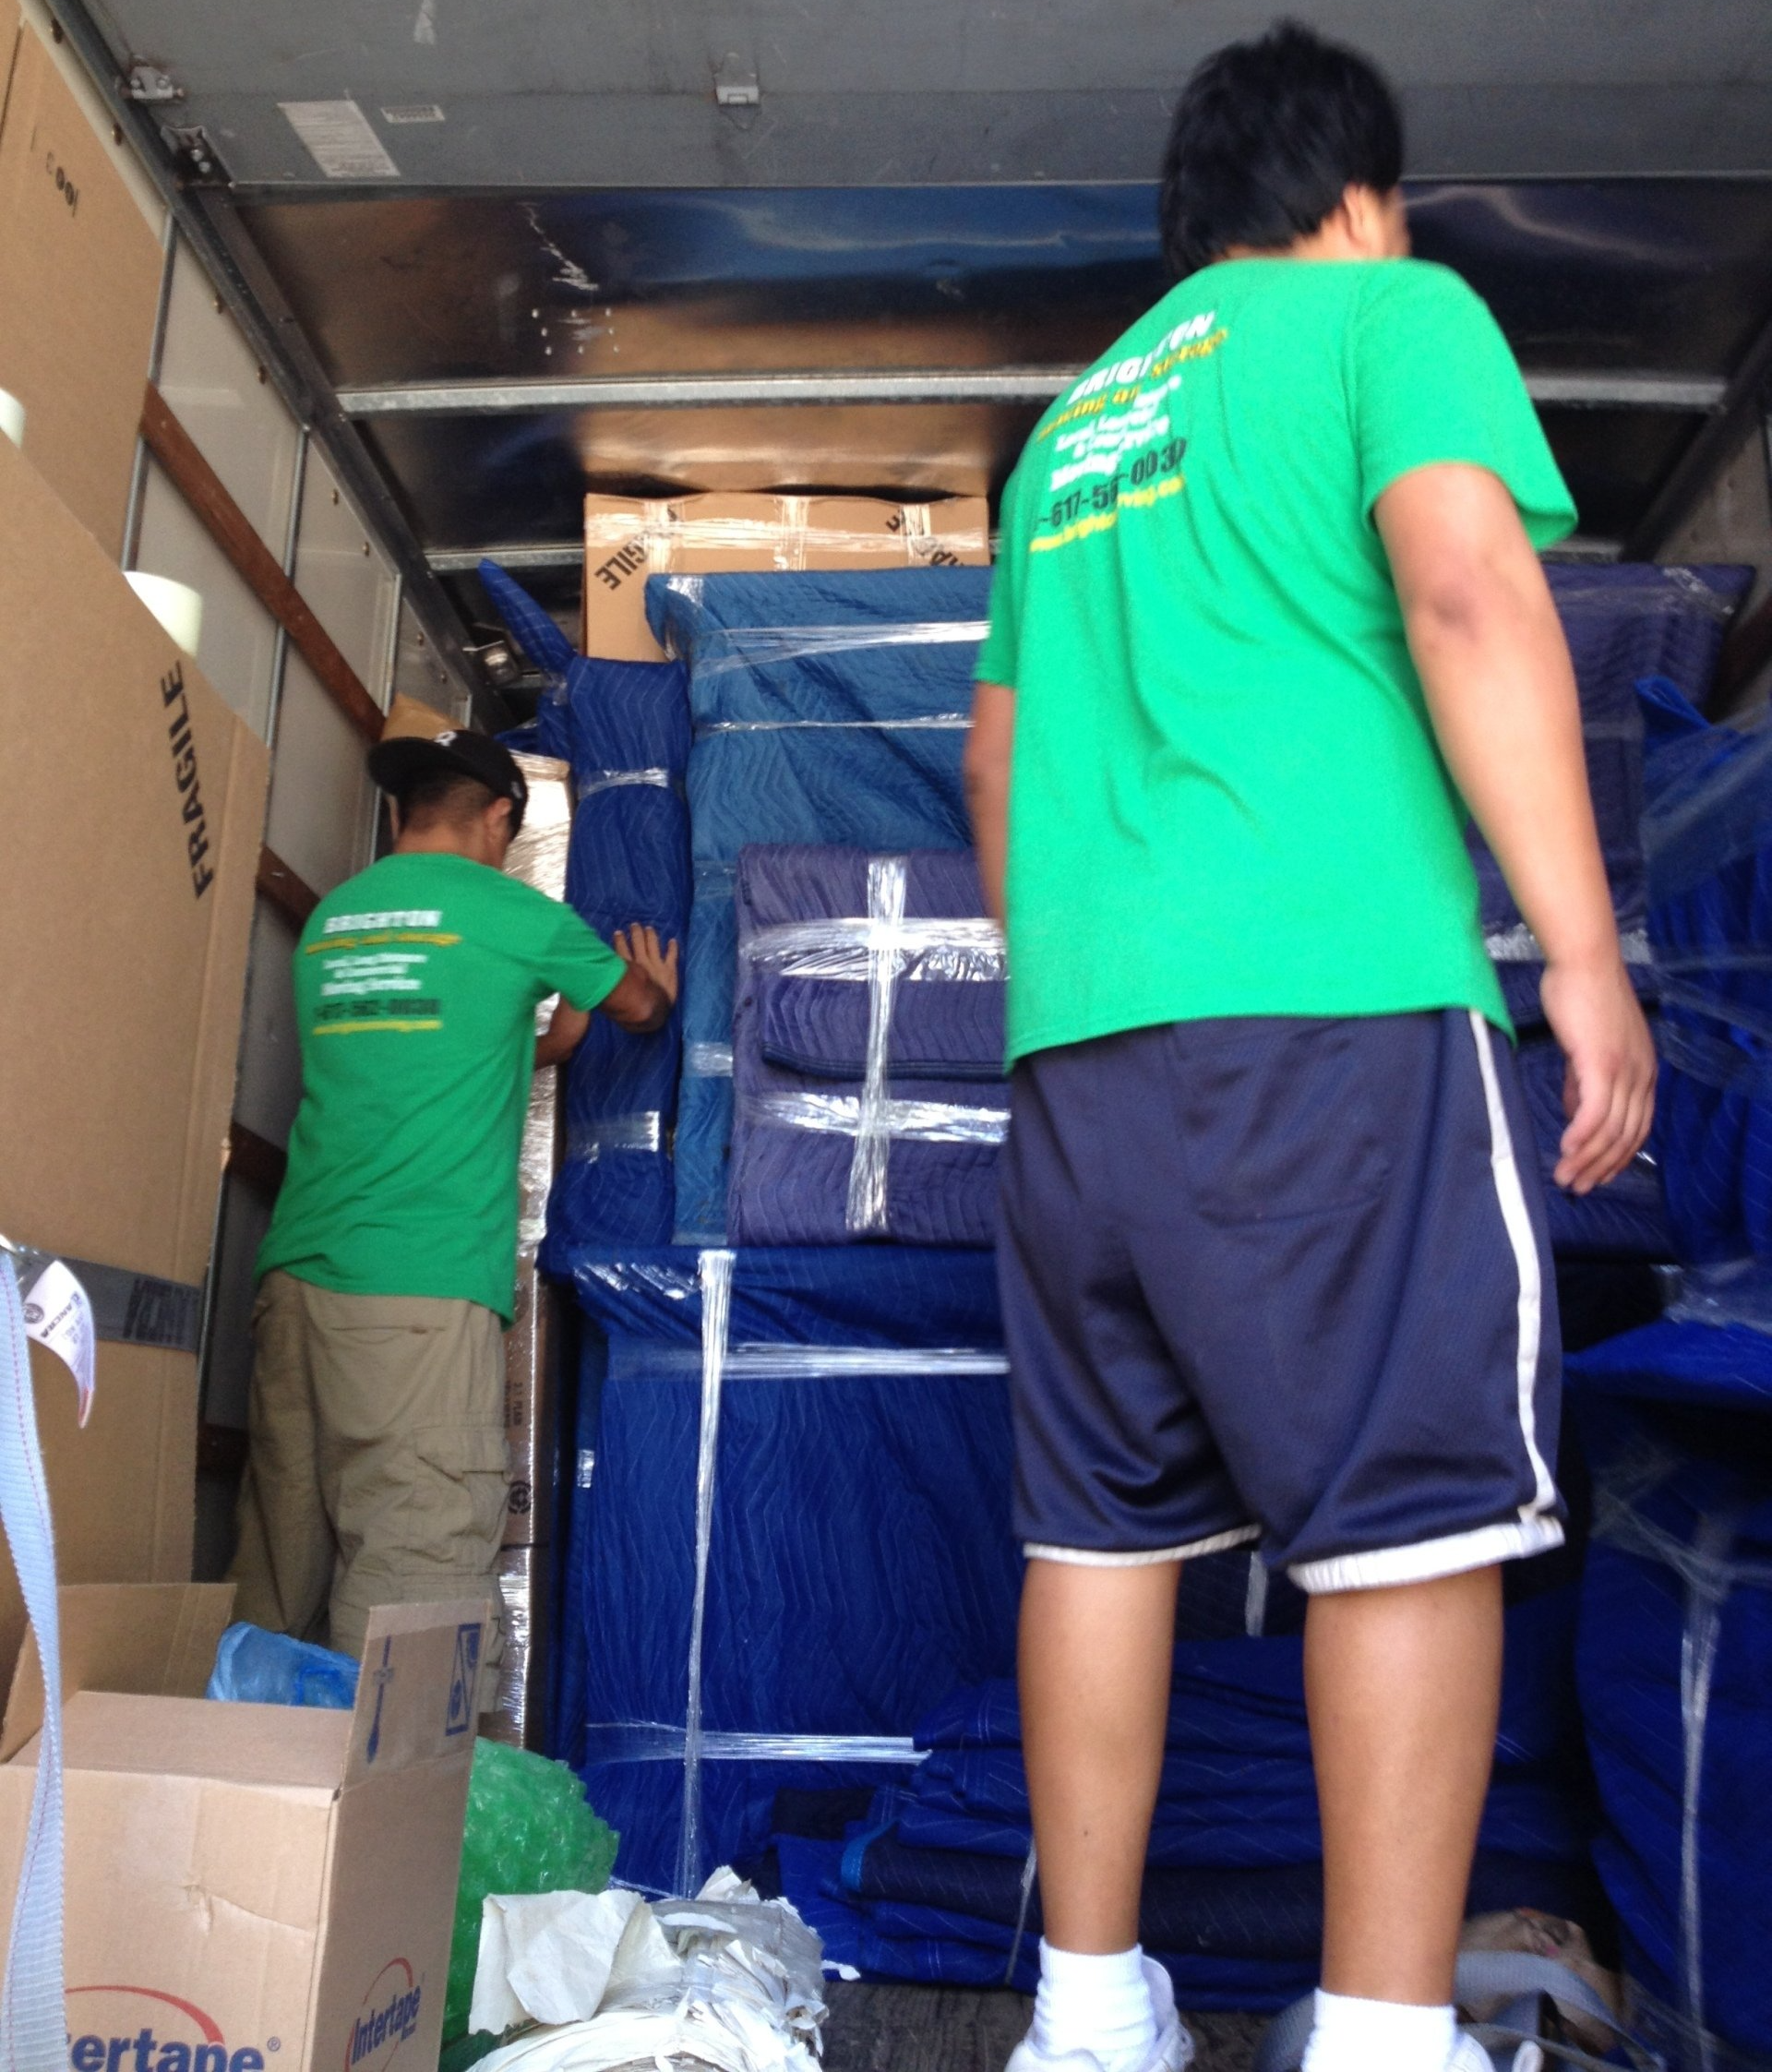 Loading furniture in the vehicle